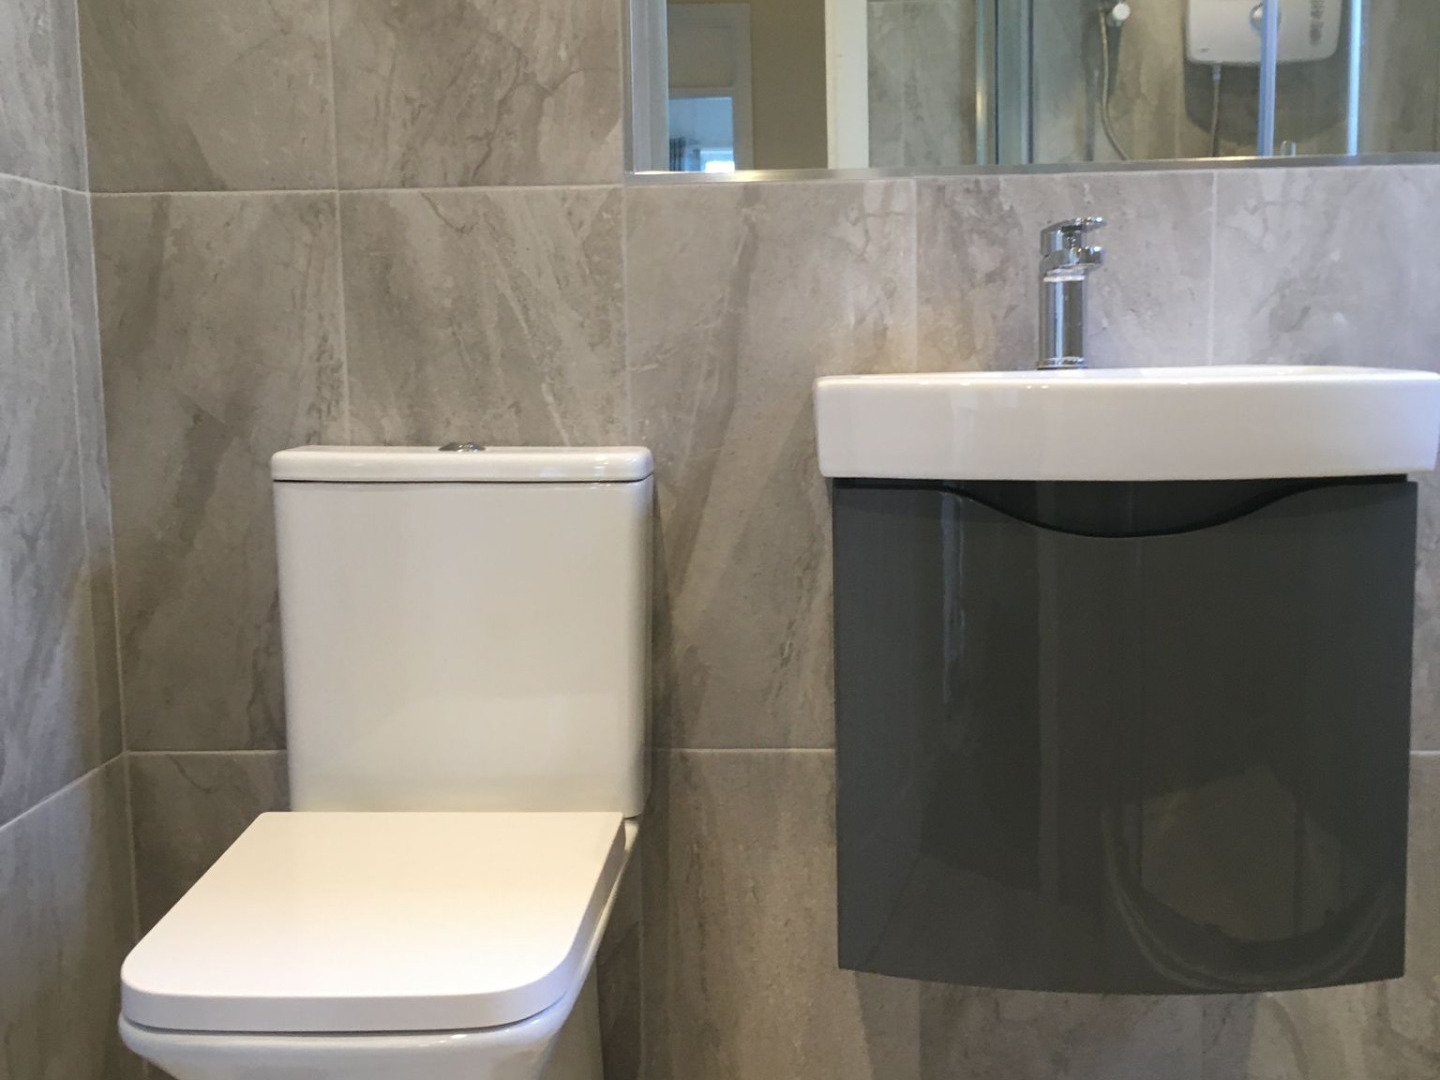 Bathroom renovation with floating vanity unit installed by Elite Building Services Swords